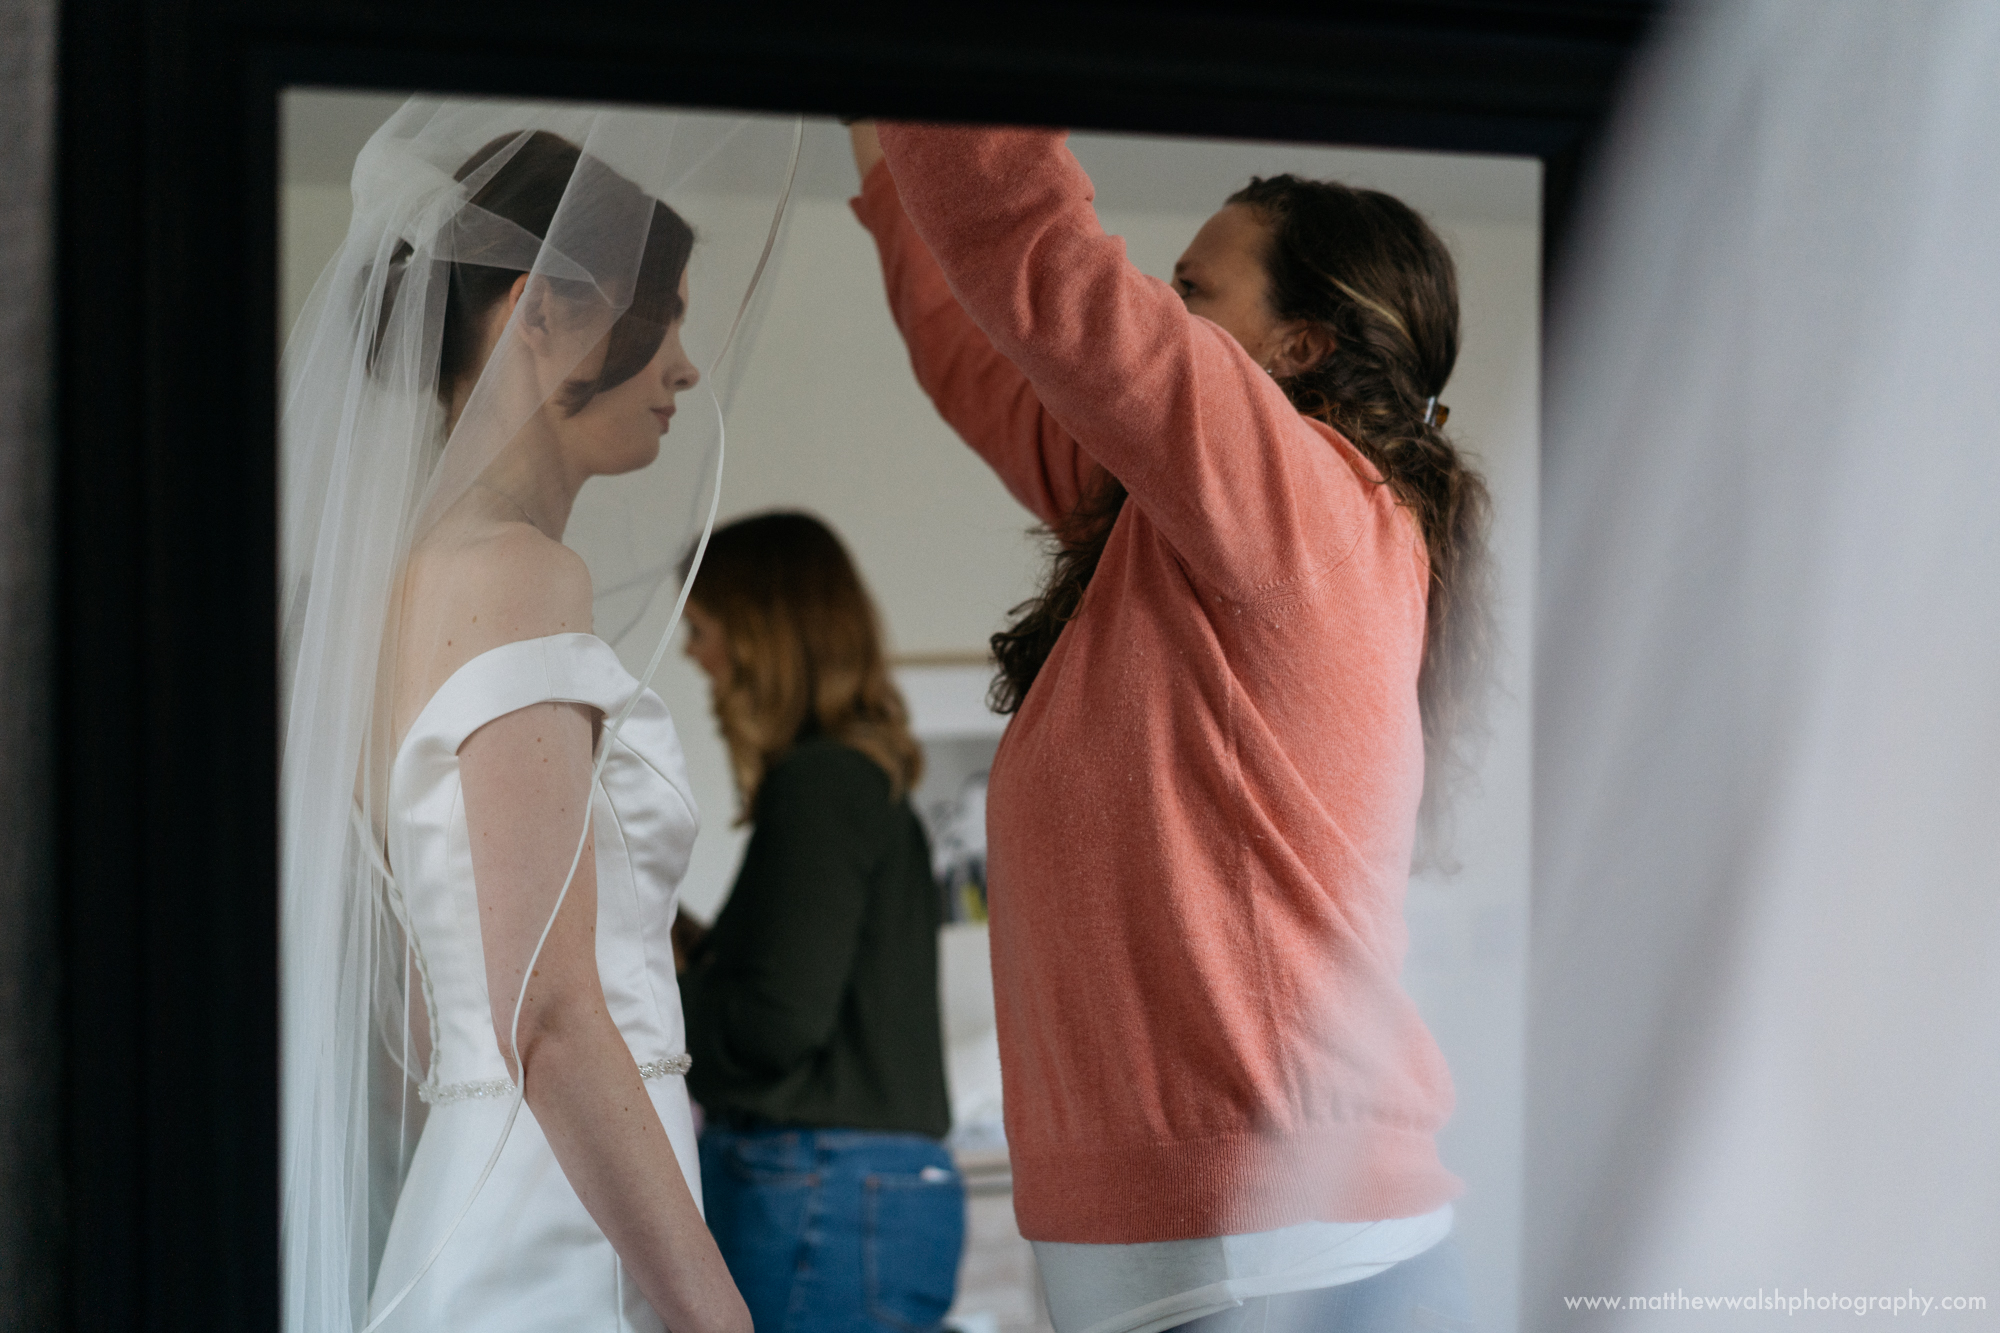 The hair stylist helping the bride with her veil